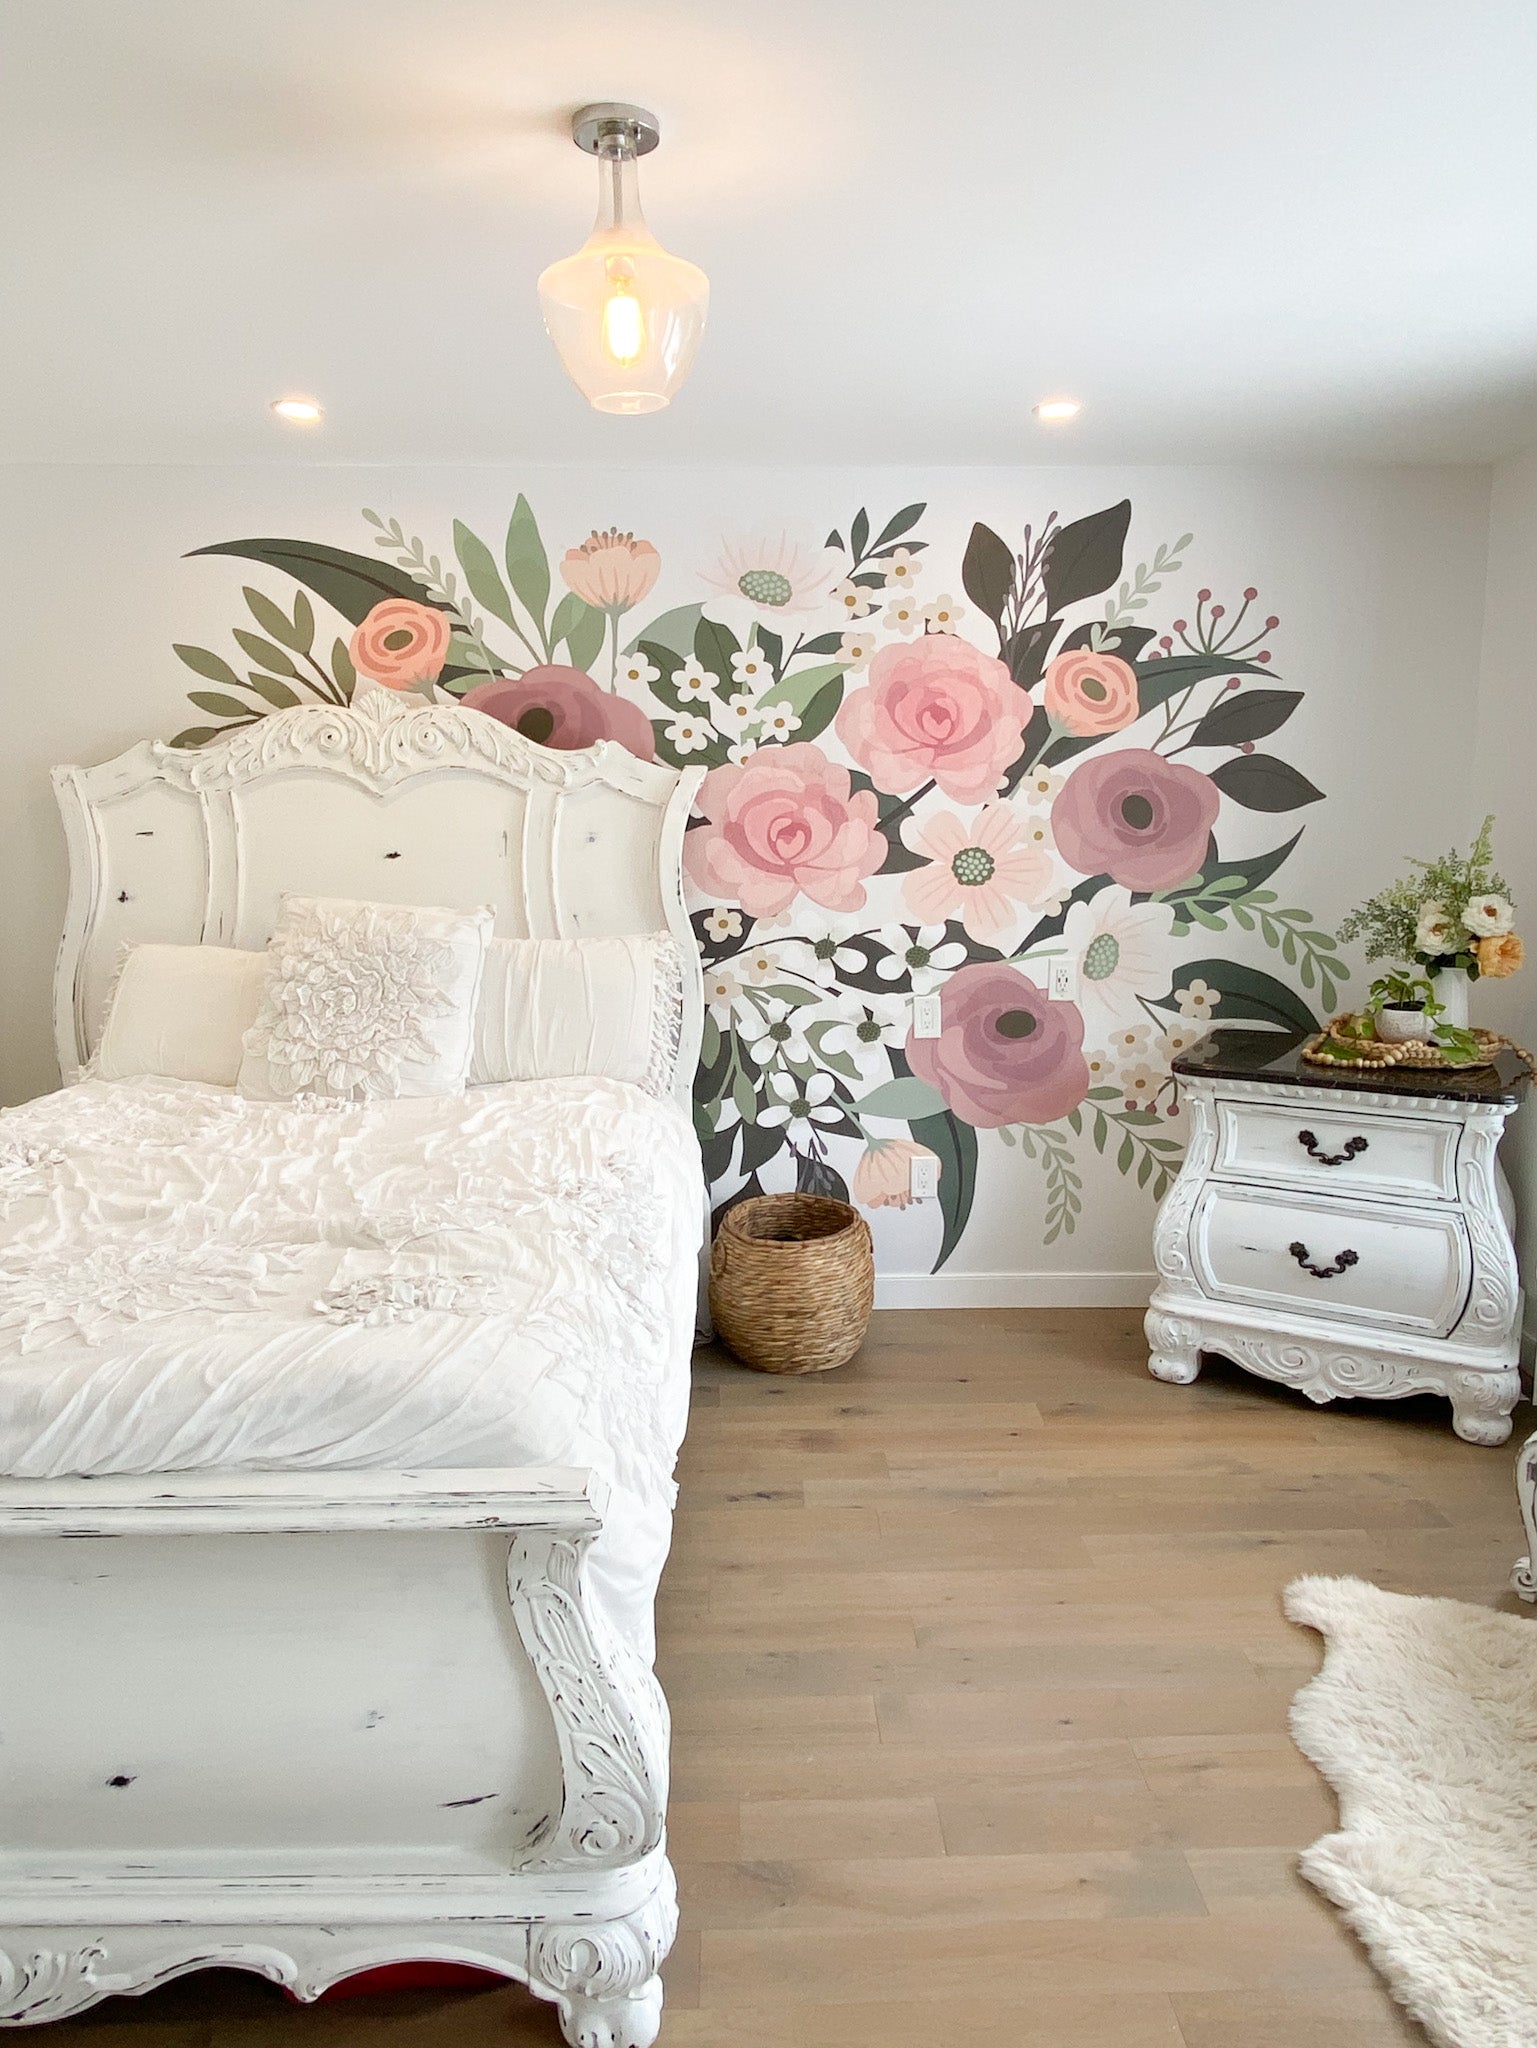 Pocketful of posies floral wall mural, flower wall covering, floral wallpaper, removable wallpaper